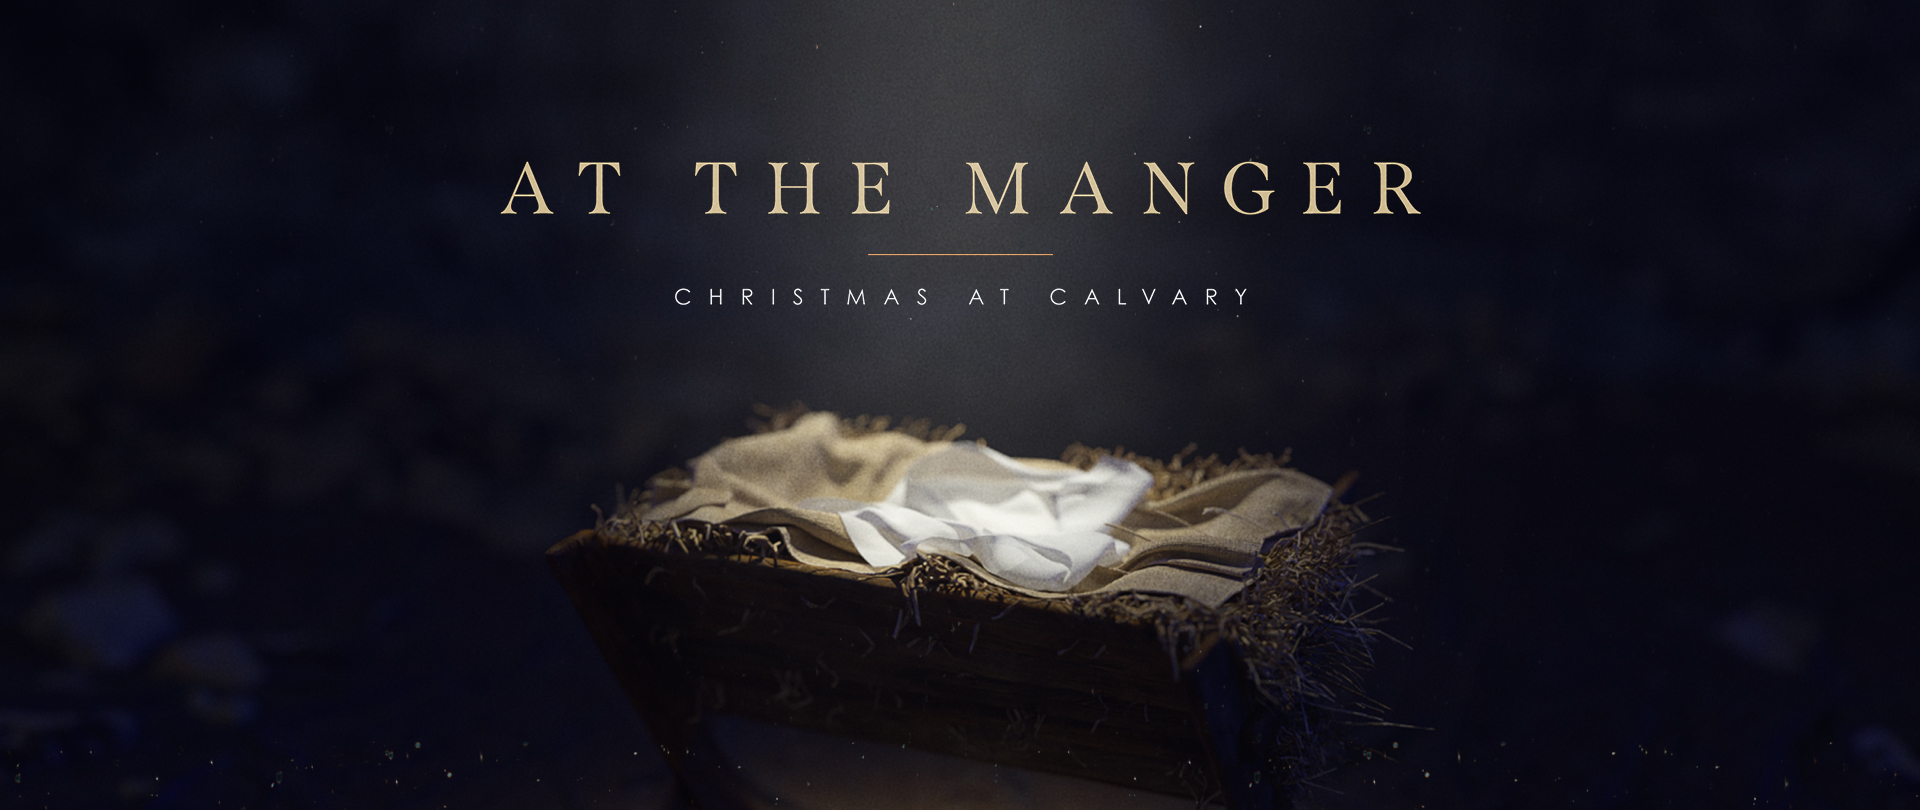 Christmas Day Devotion
"At the Manger: Our Response"
No Sanctuary Service on 12/25
ONLINE ONLY
